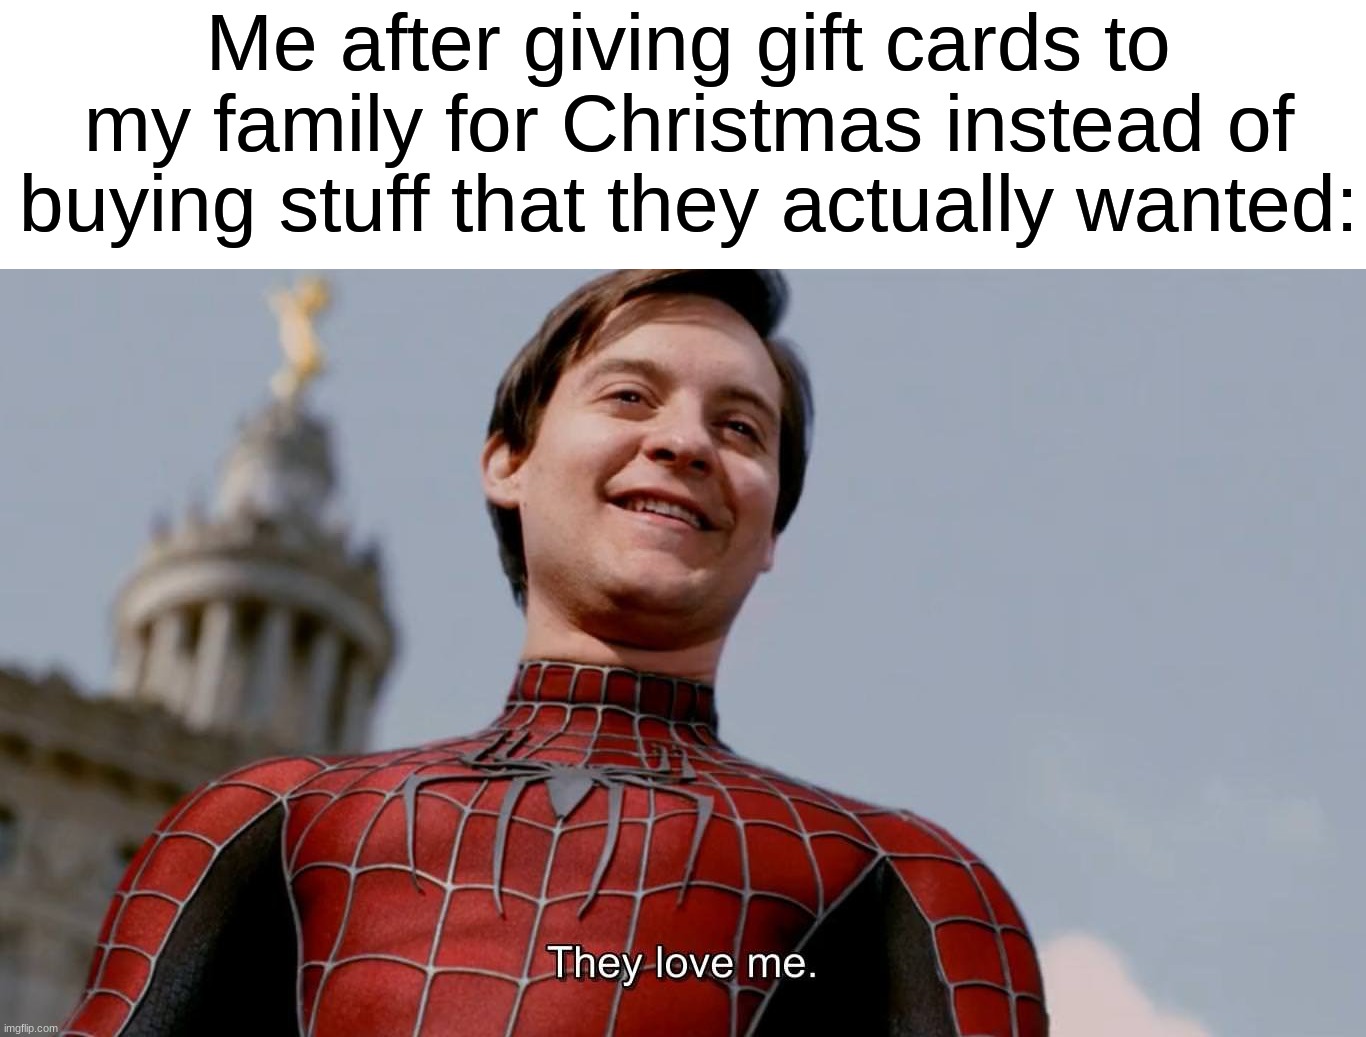 On the plus side, they can get whatever they want ig | Me after giving gift cards to my family for Christmas instead of buying stuff that they actually wanted: | image tagged in they love me,memes,funny,christmas,christmas memes,relatable memes | made w/ Imgflip meme maker